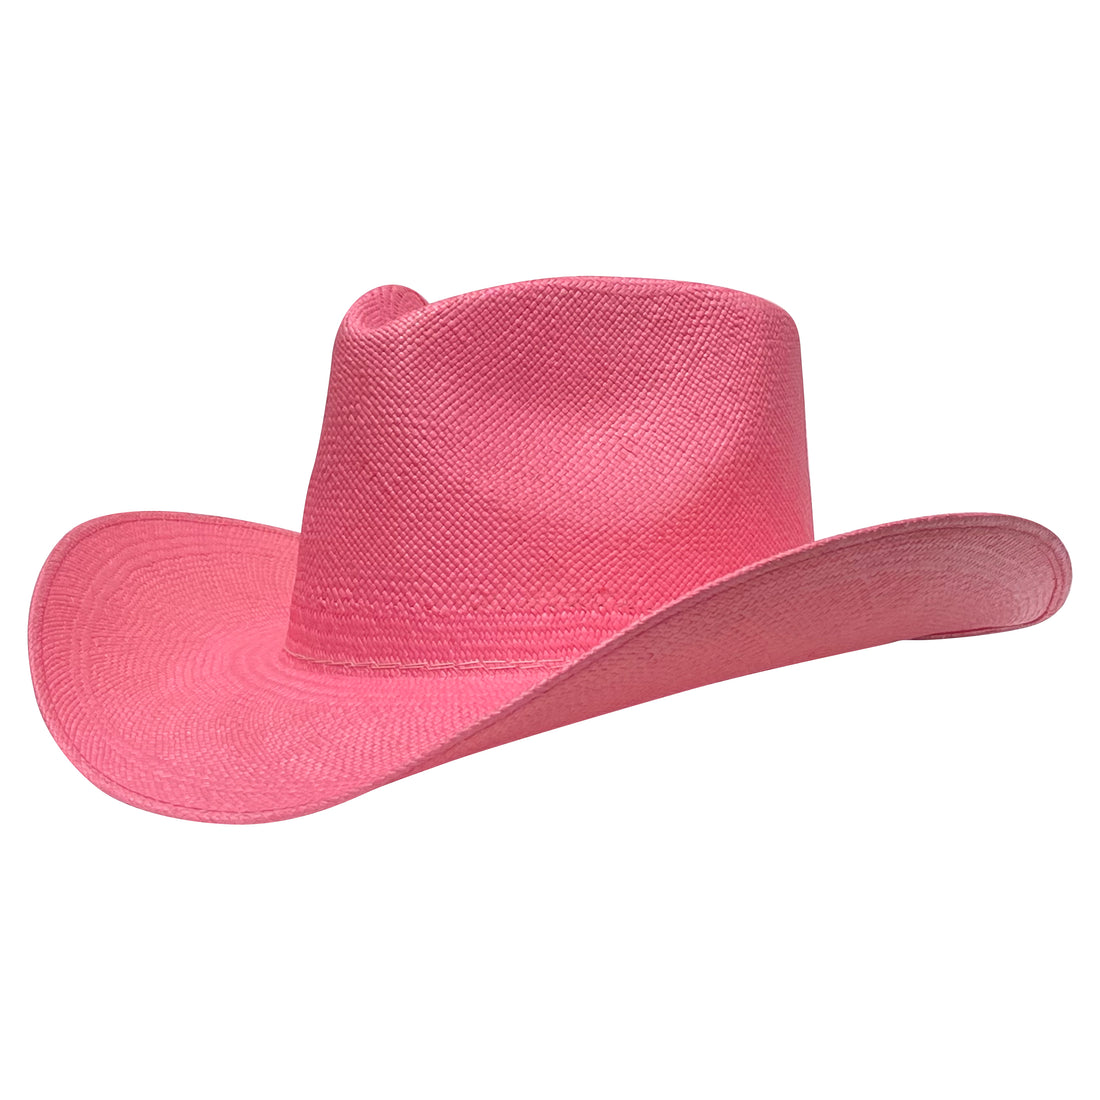 Western Straw Hat - Colors